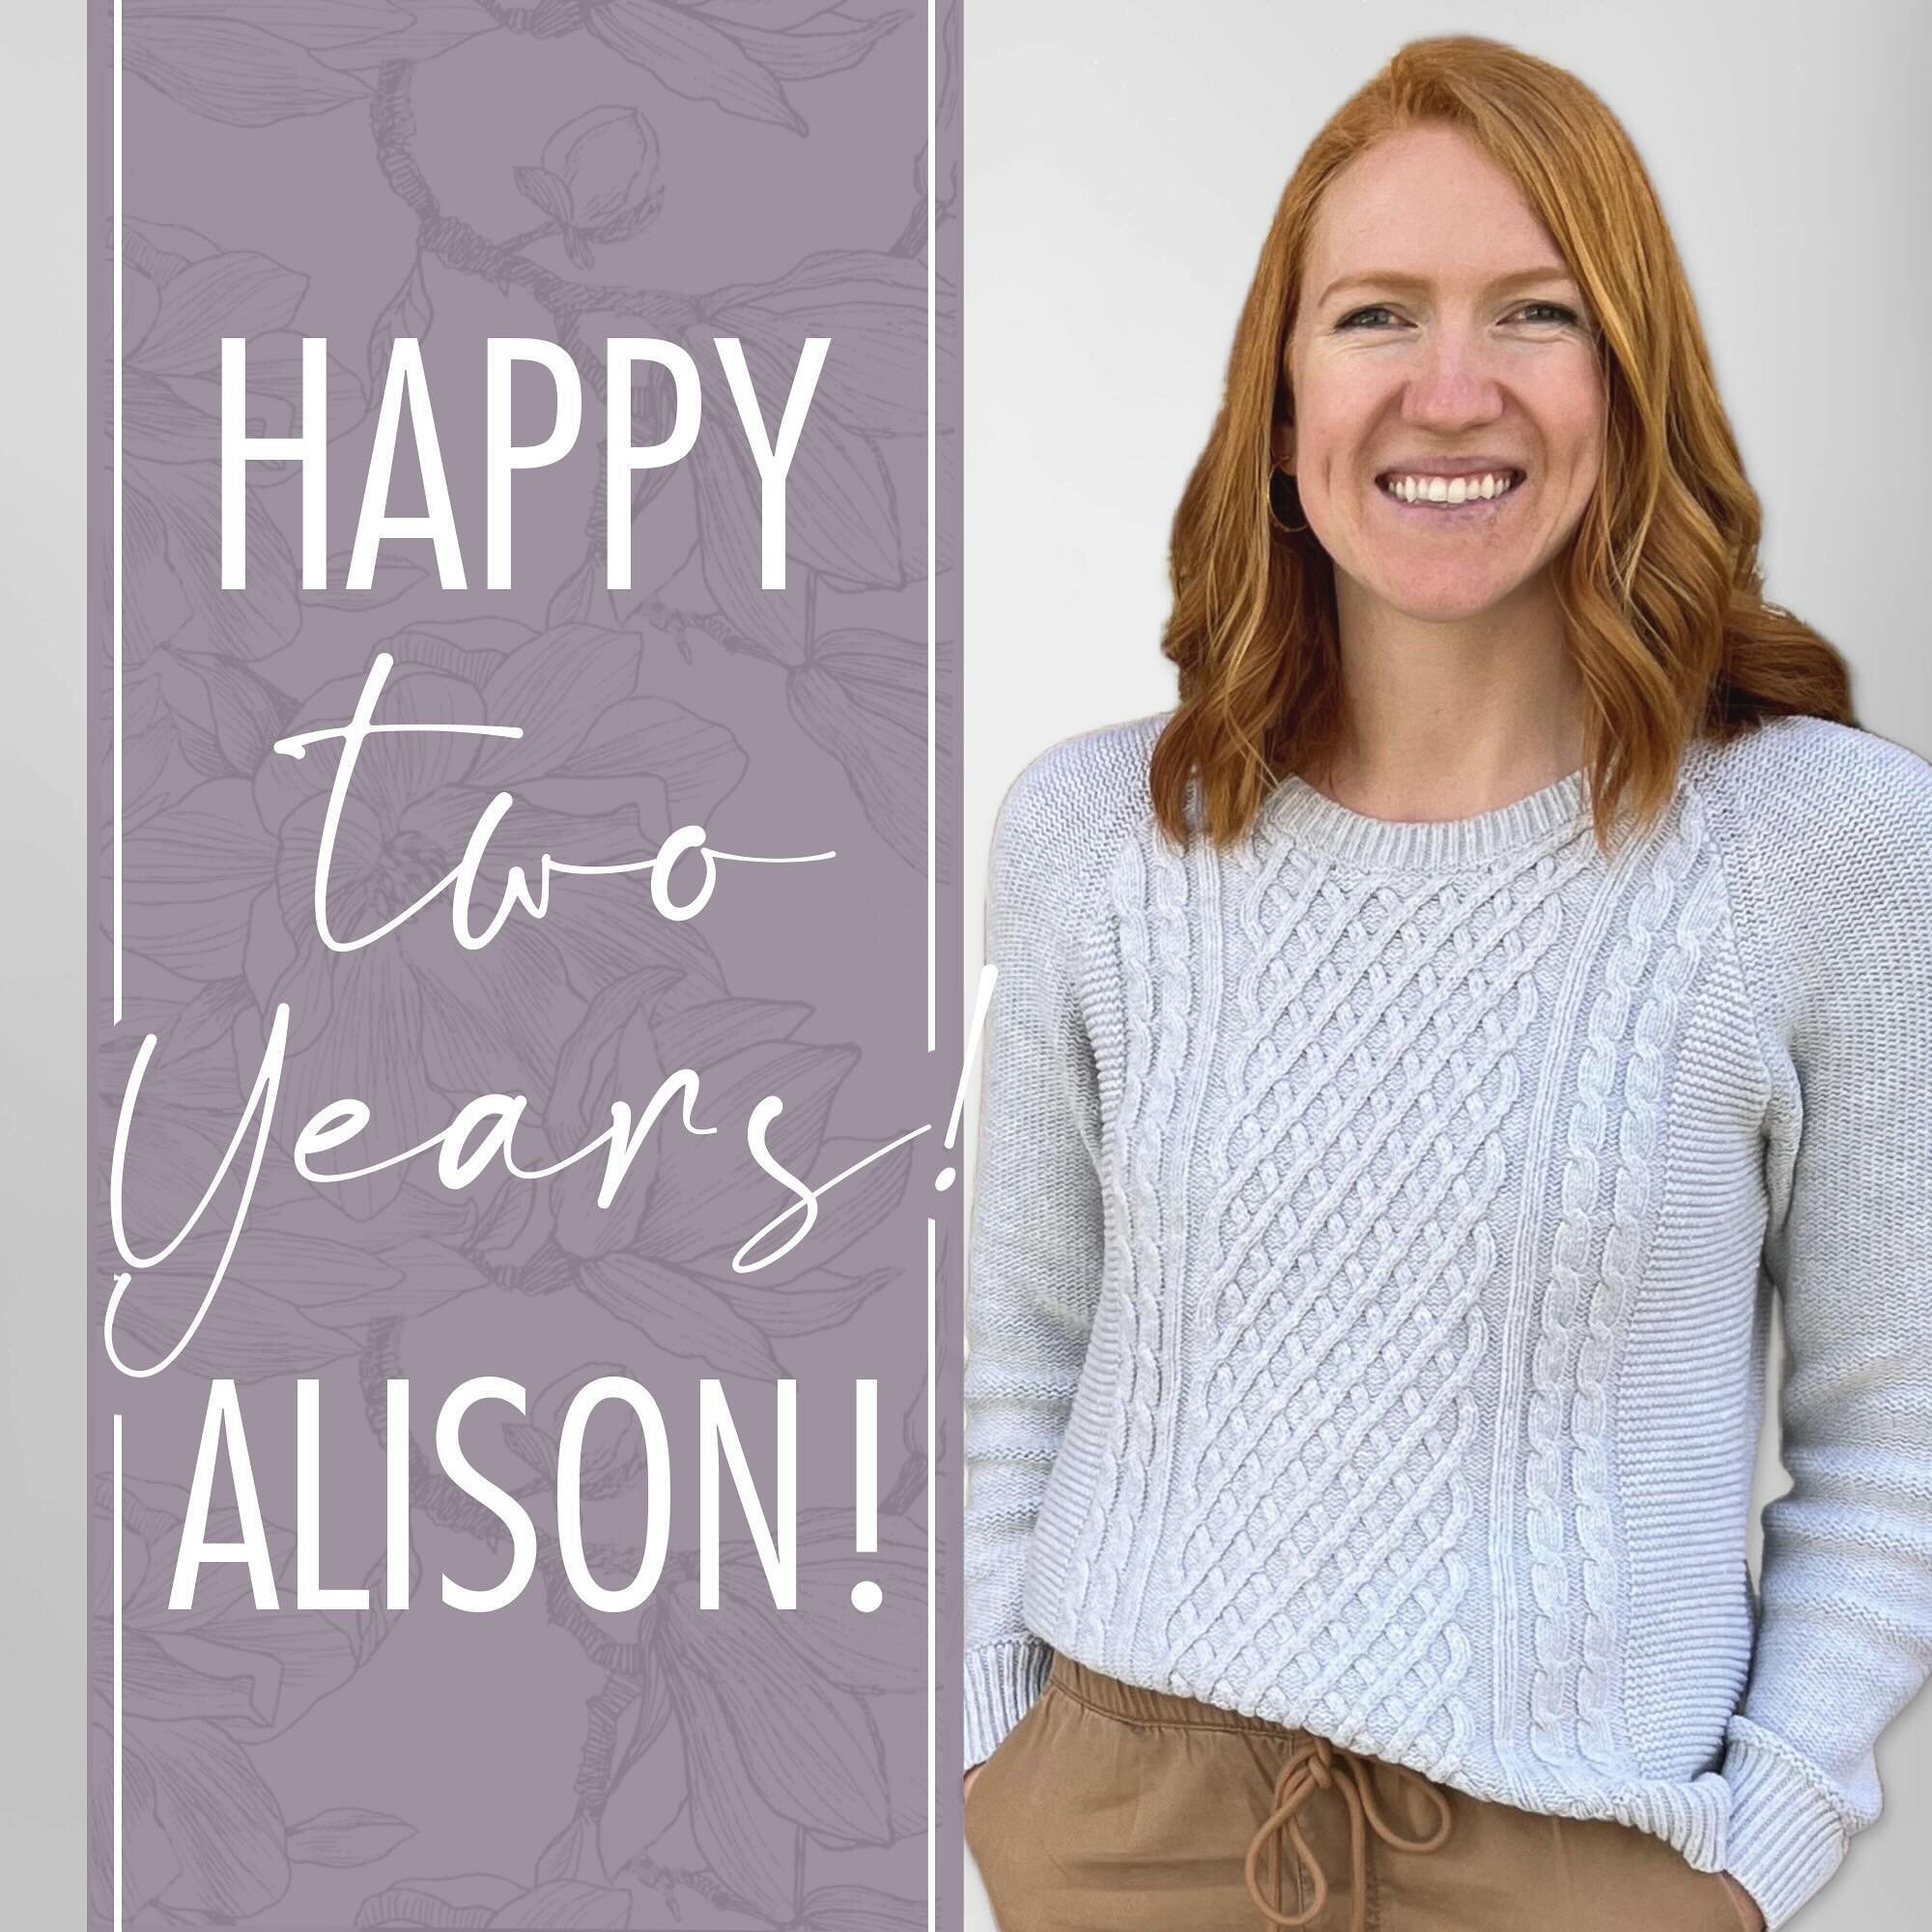 Today, we&rsquo;re celebrating Alison&rsquo;s two-year work anniversary at Miriam&rsquo;s House!

Alison&rsquo;s leadership and compassion uplift our team and have been a key part of her journey from Housing Case Manager to Assistant Director of Hous